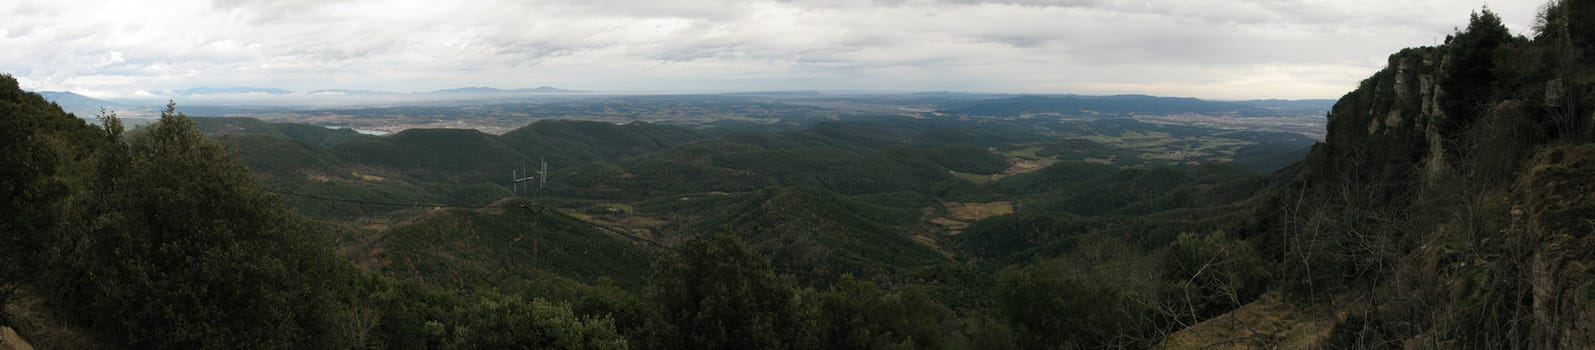 Panorama view of Mass�s de les Gavarres a mountain range in catalonia, spain